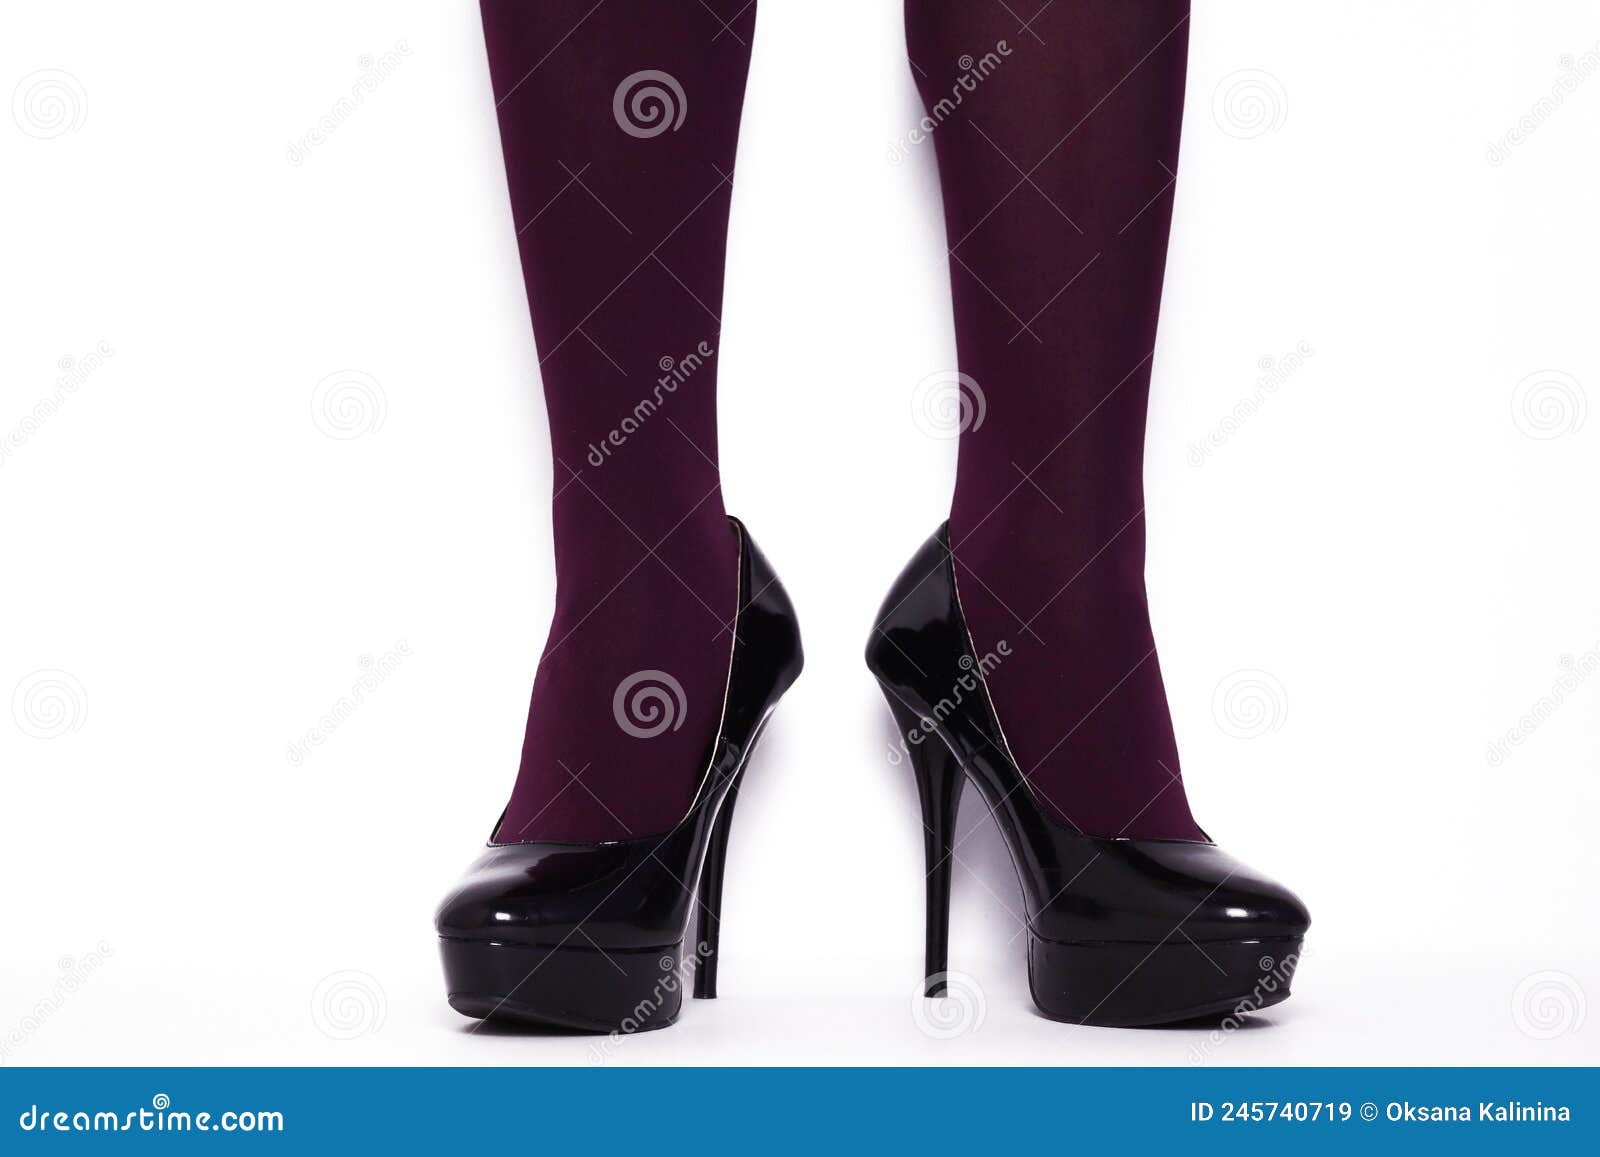 Black Stilettos With High Heels And Purple Stockings Stock Image